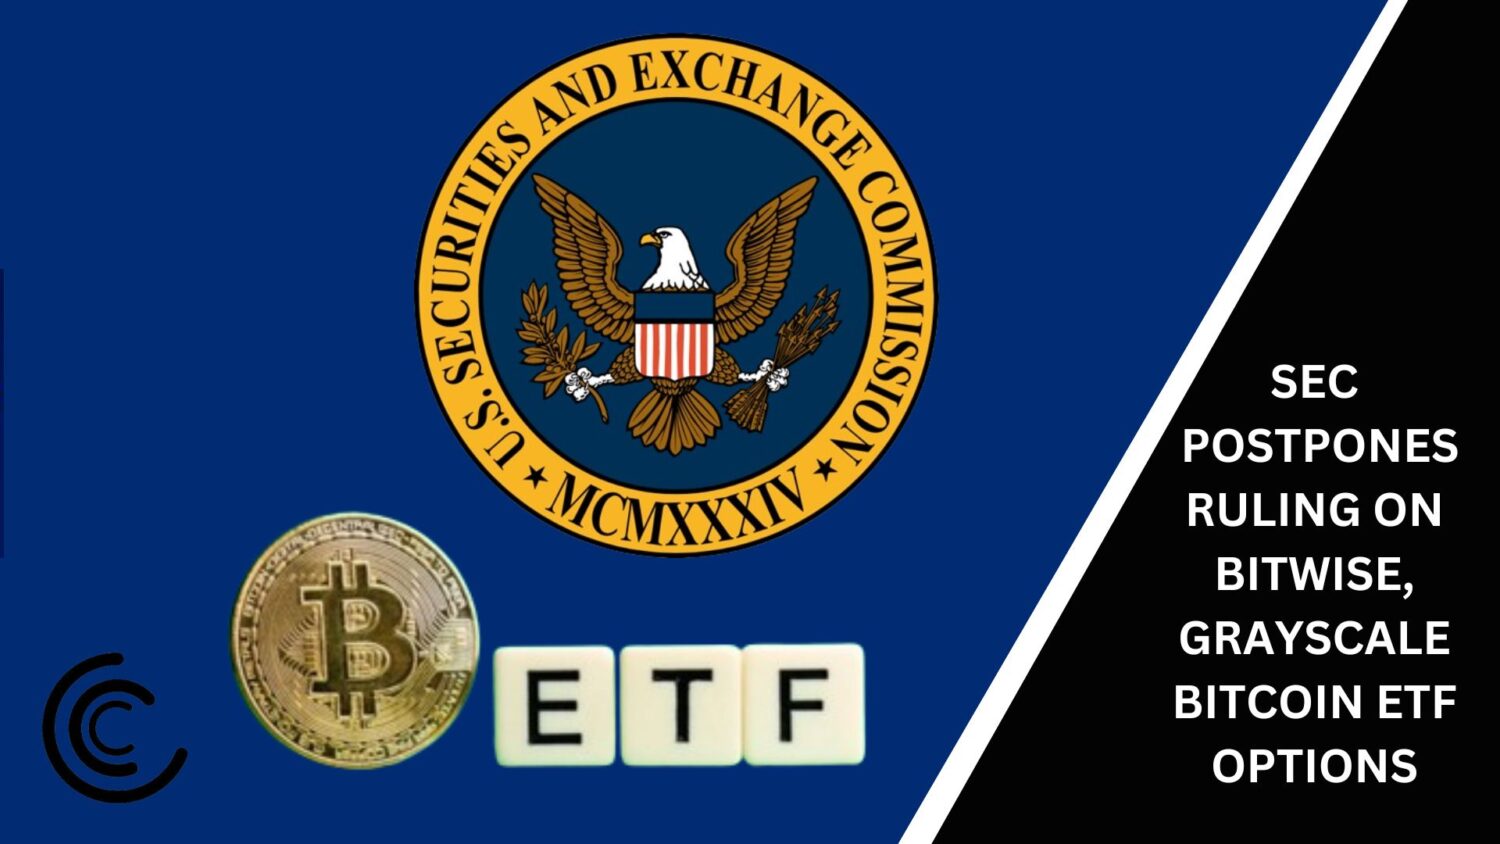 Sec Postpones Ruling On Bitwise, Grayscale Bitcoin Etf Options